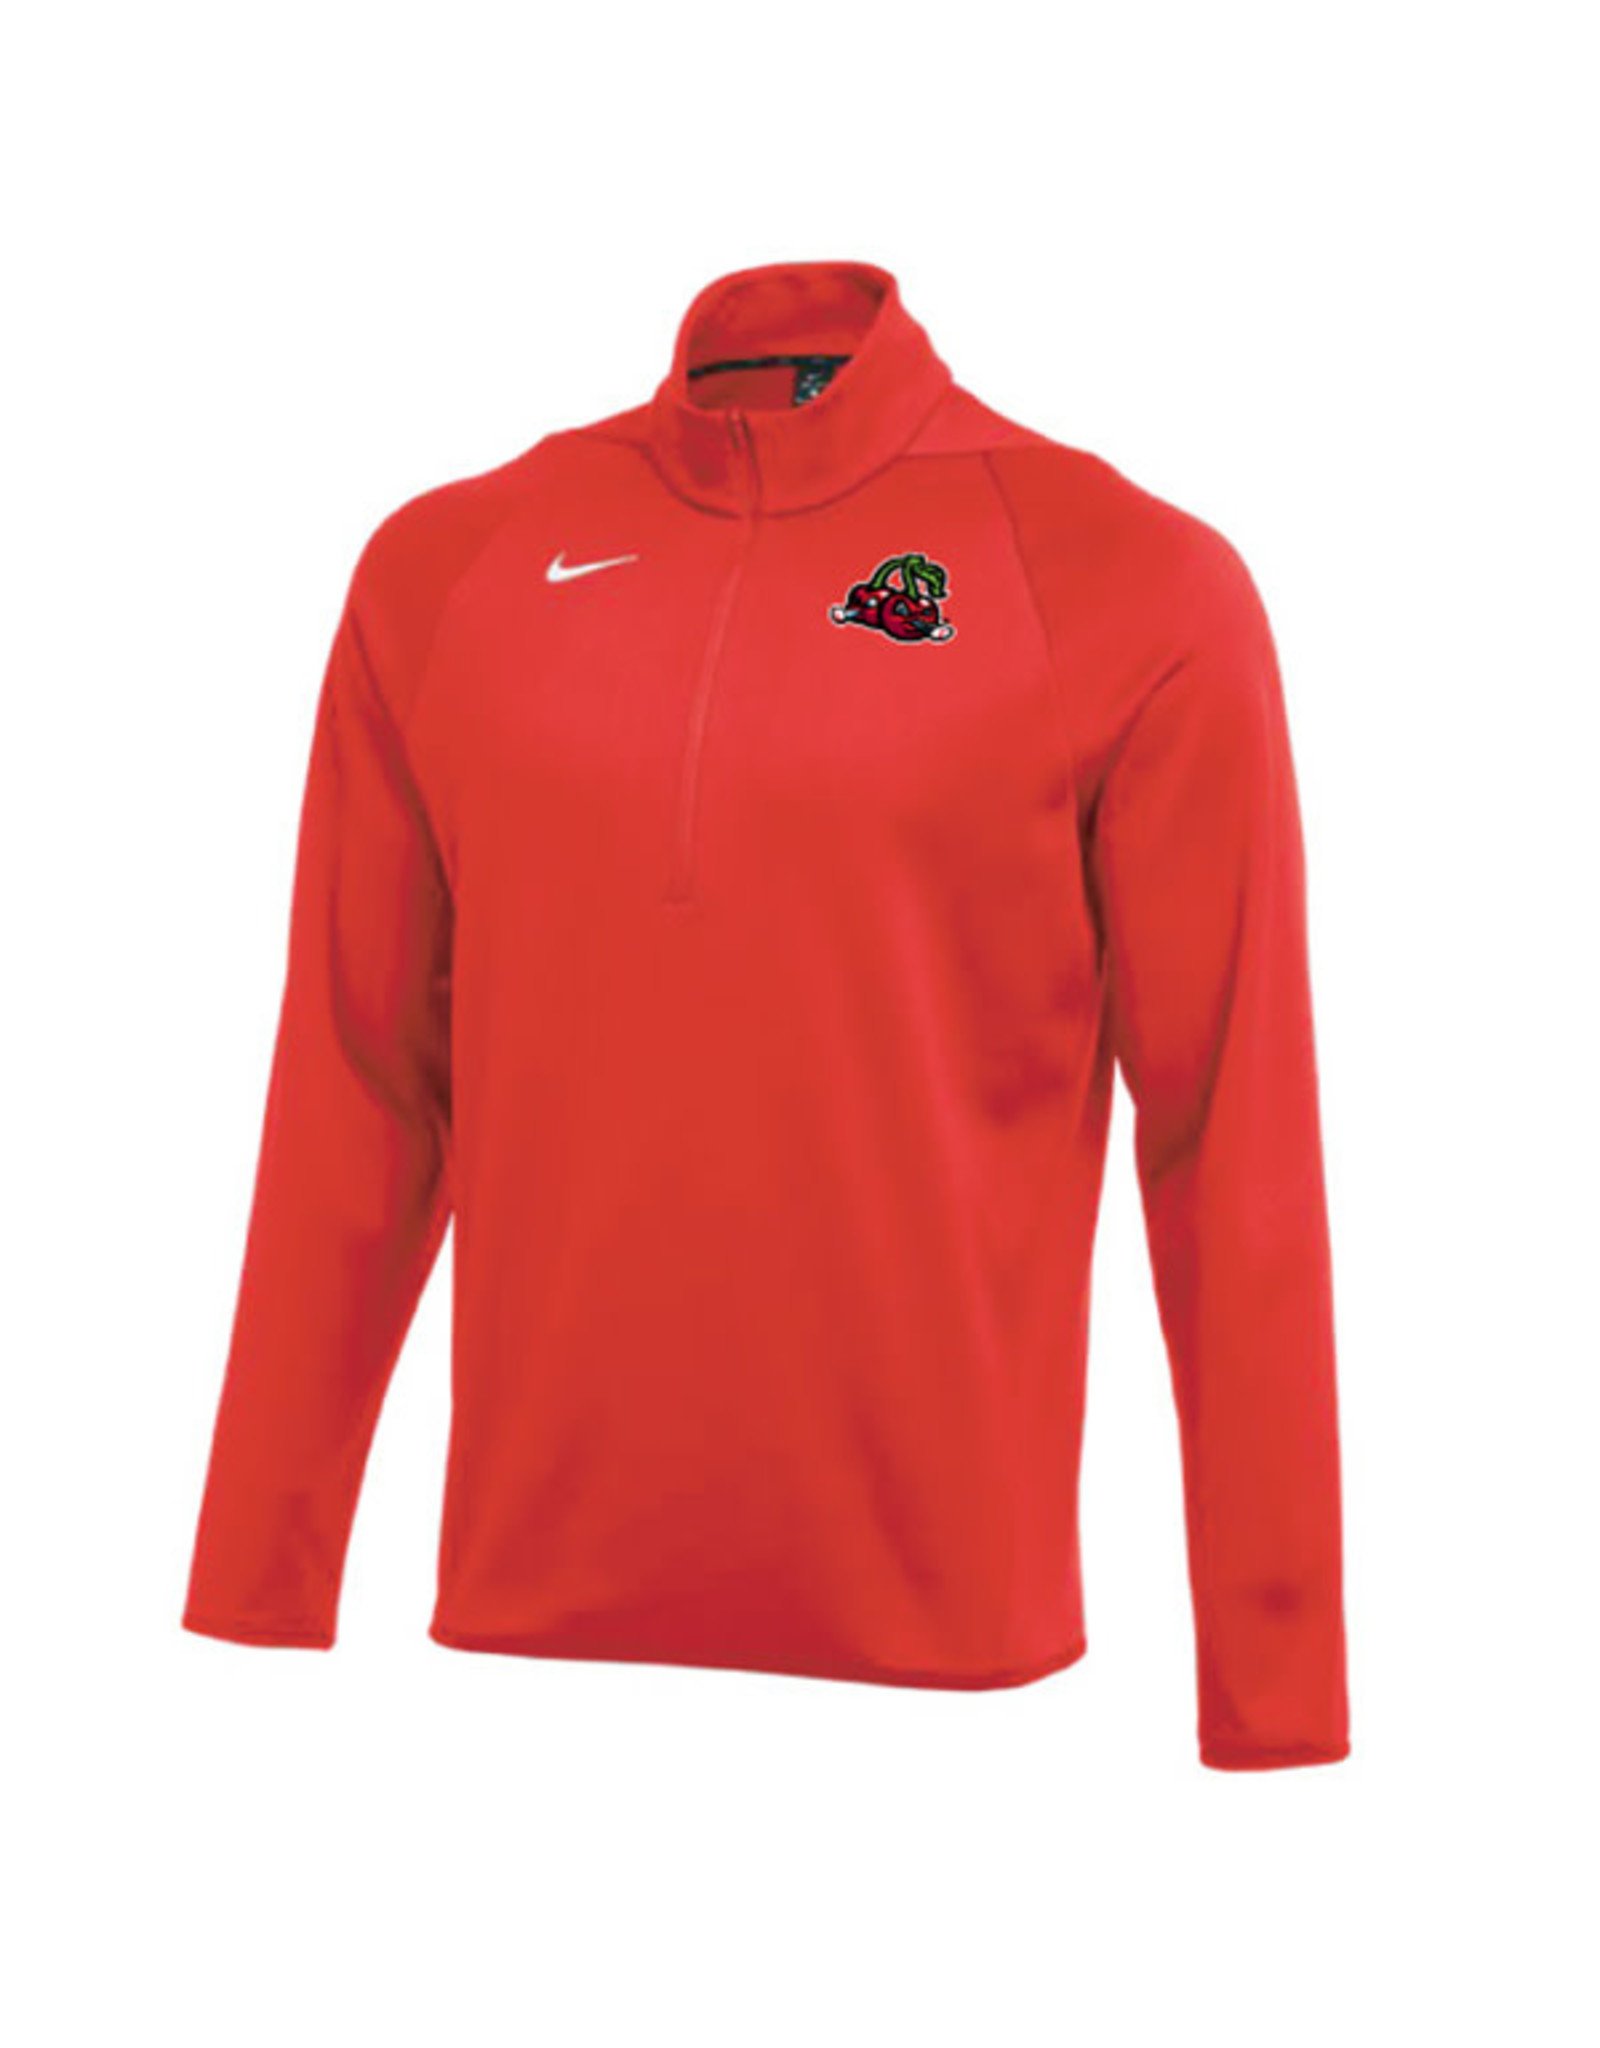 3730 Nike Red Therma 1/4 Zip Pullover